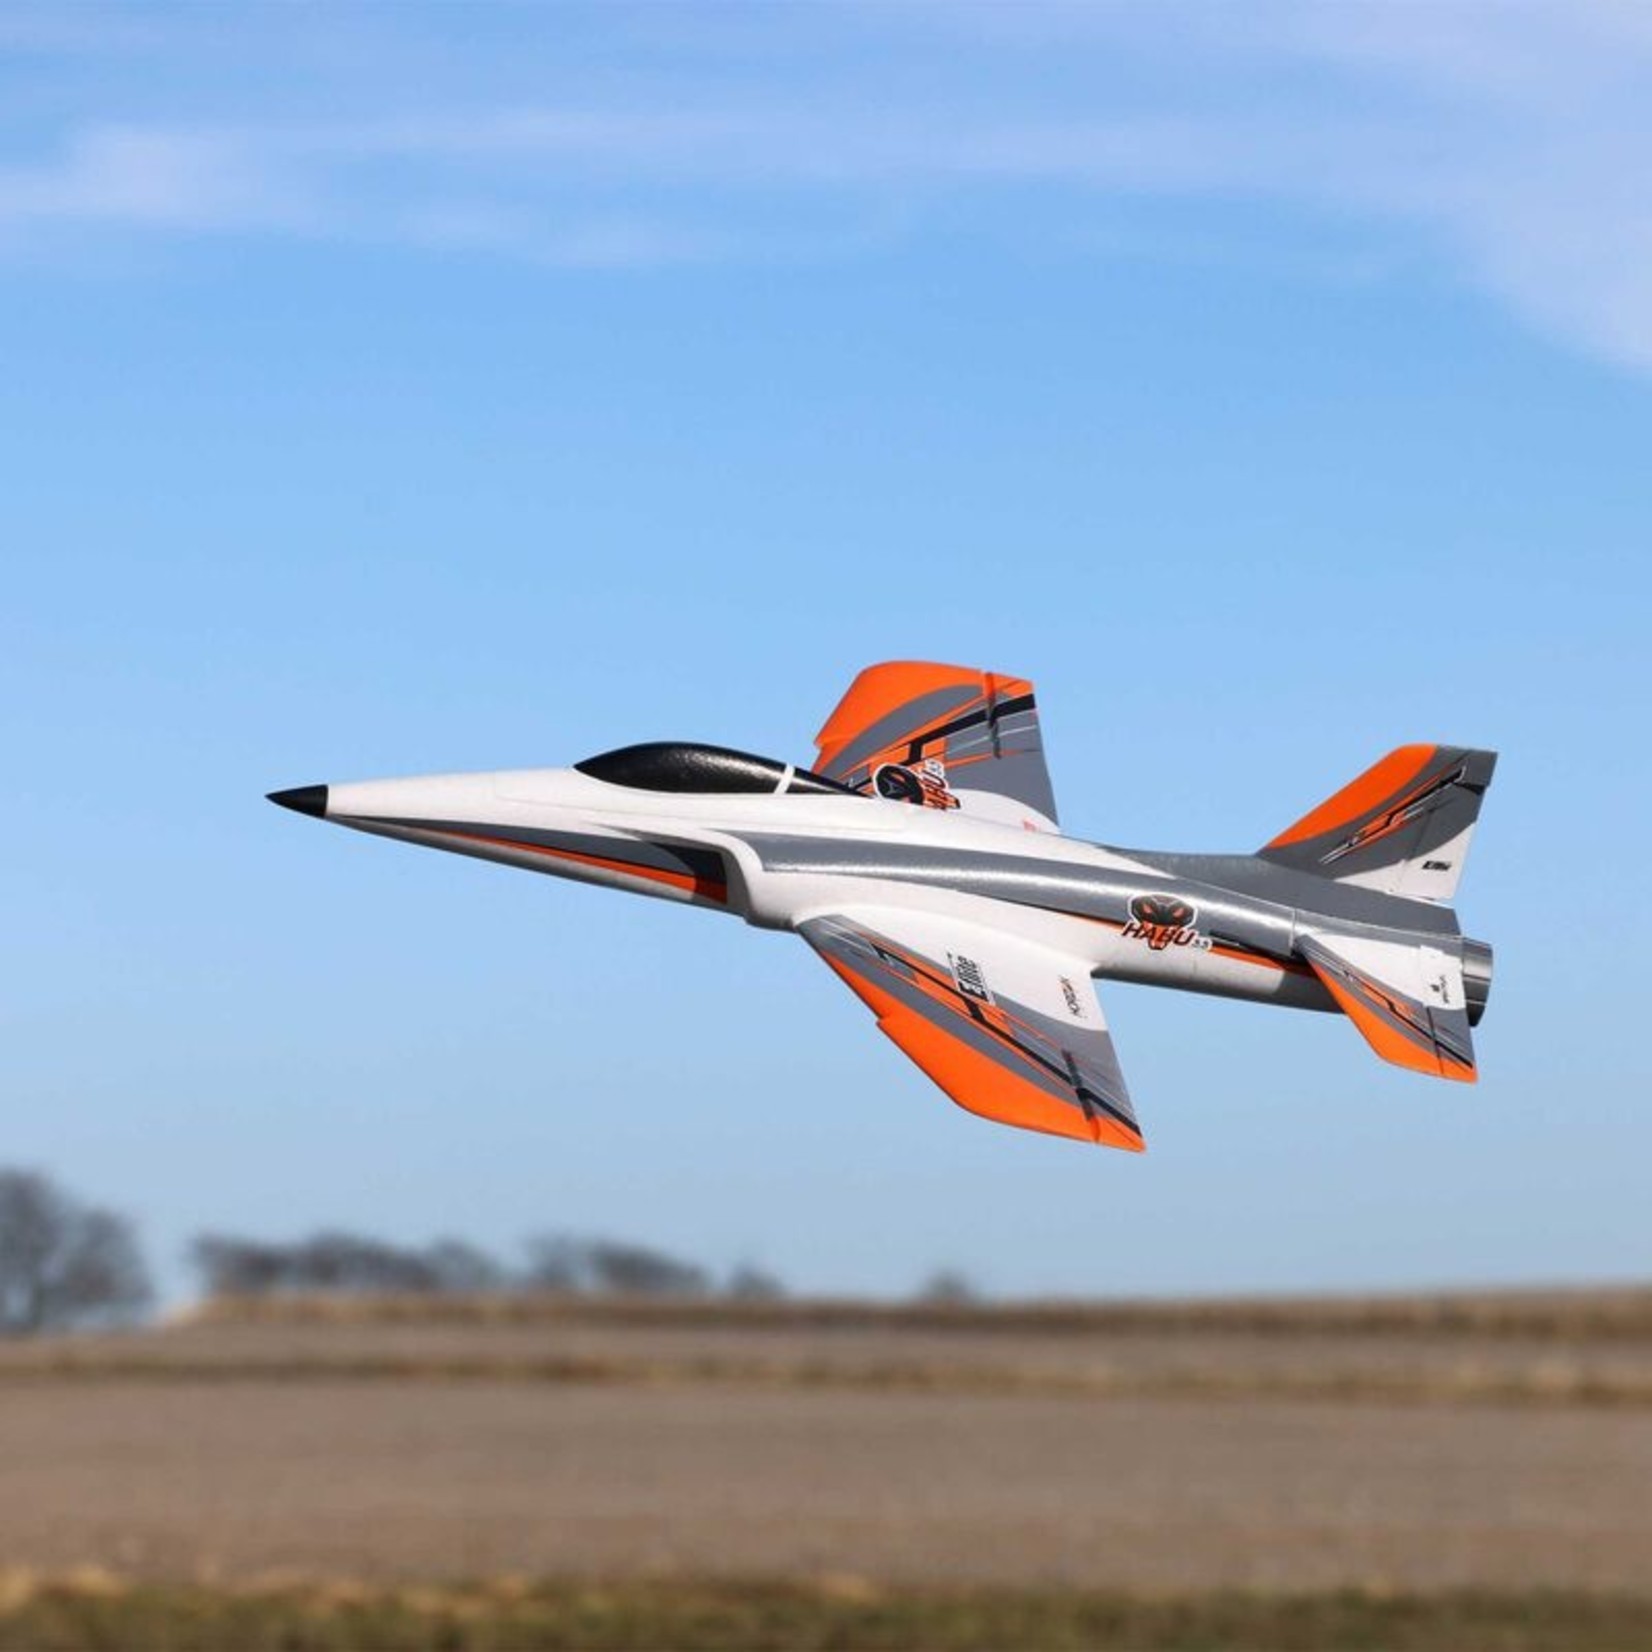 E-FLITE EFL02350  Habu SS (Super Sport) 50mm EDF Jet BNF Basic with SAFE Select and AS3X